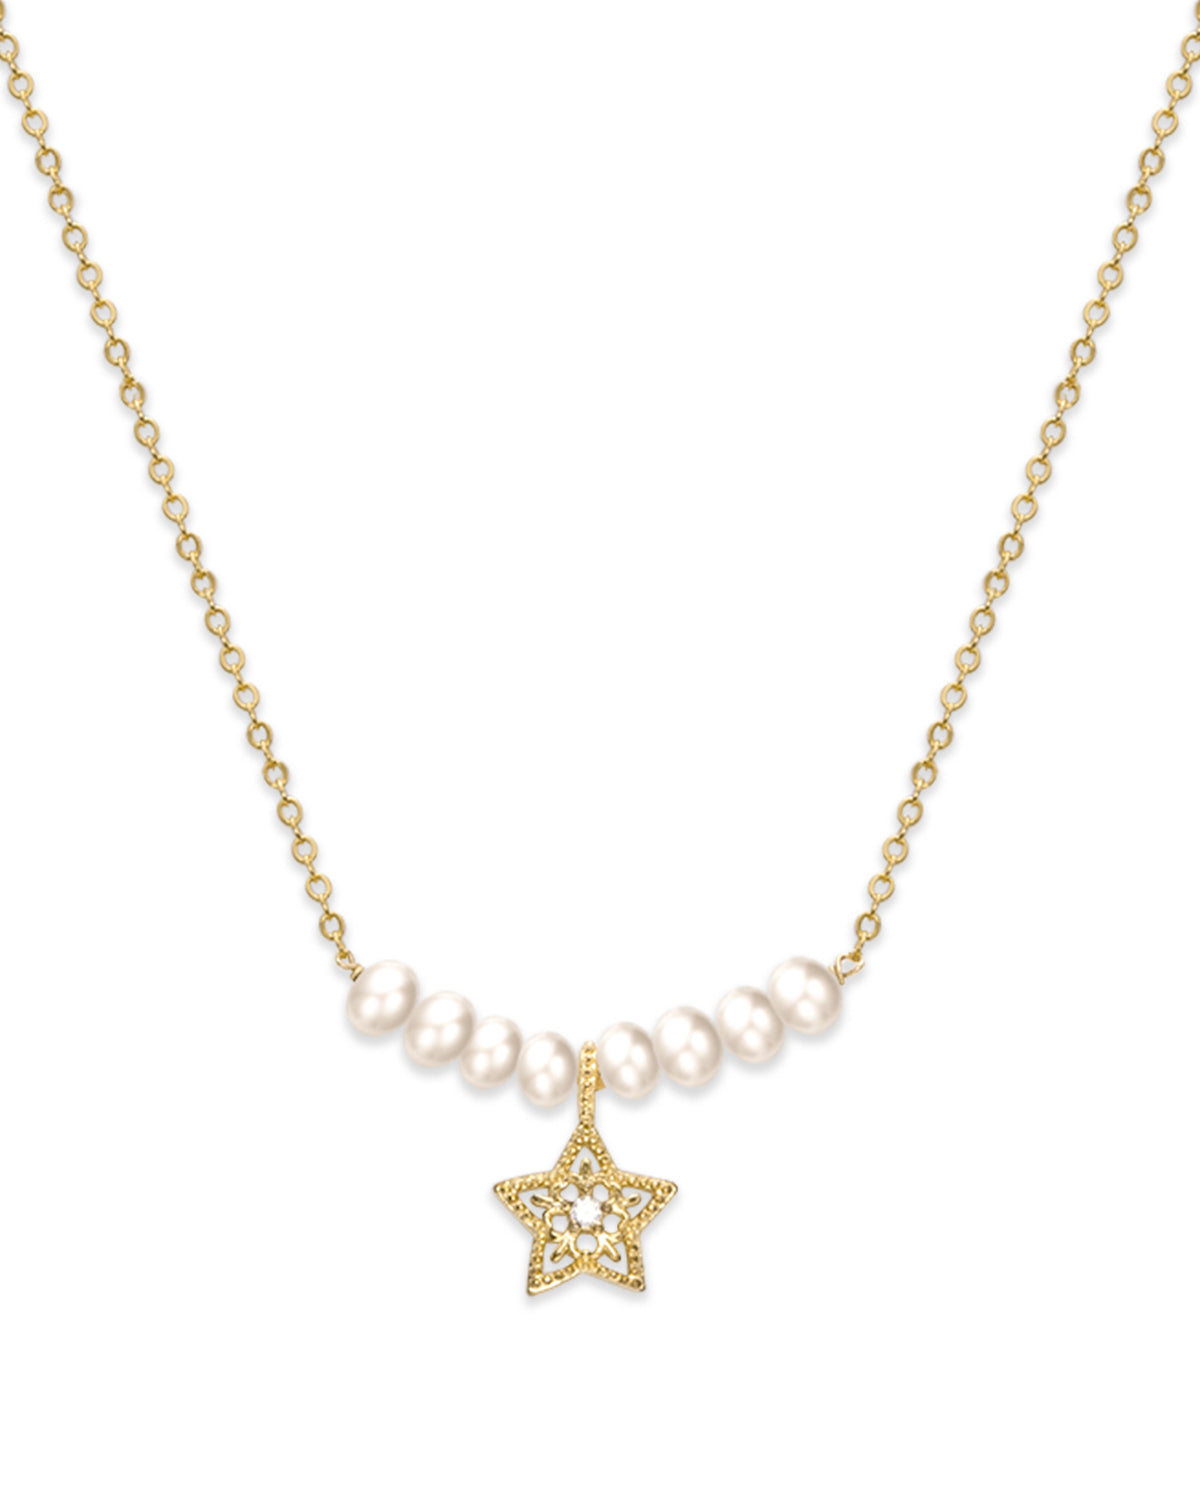 4-5mm White Freshwater Pearl Golden Star Necklace